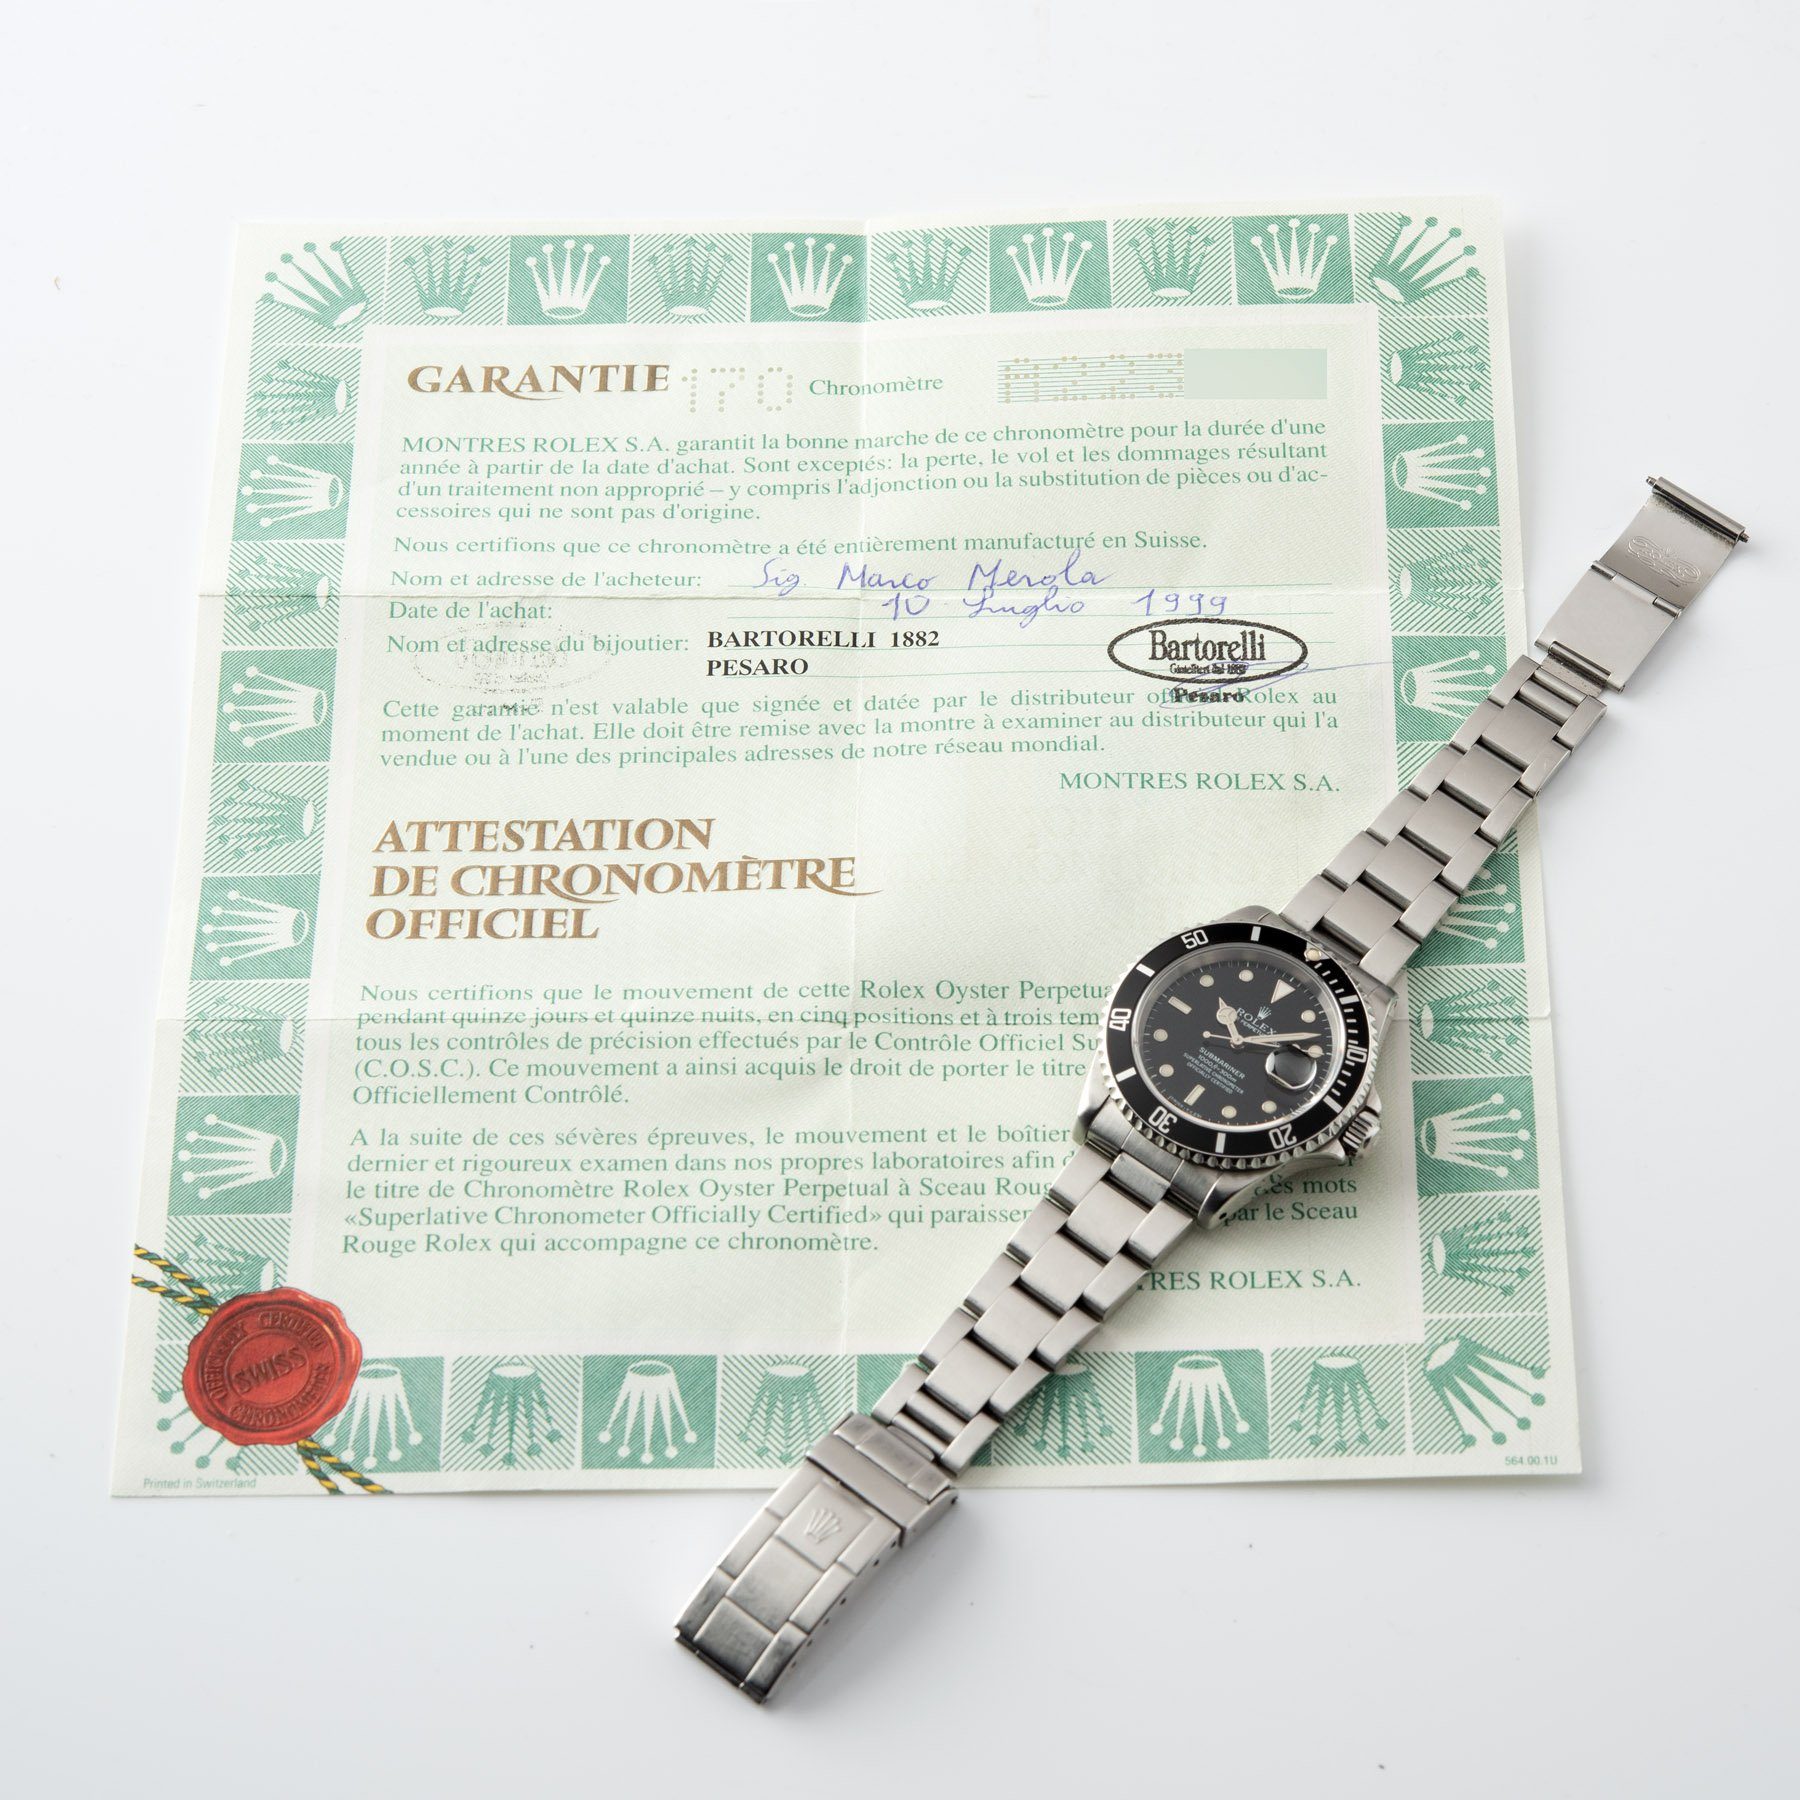 Rolex Submariner Date Reference 16610 with Papers